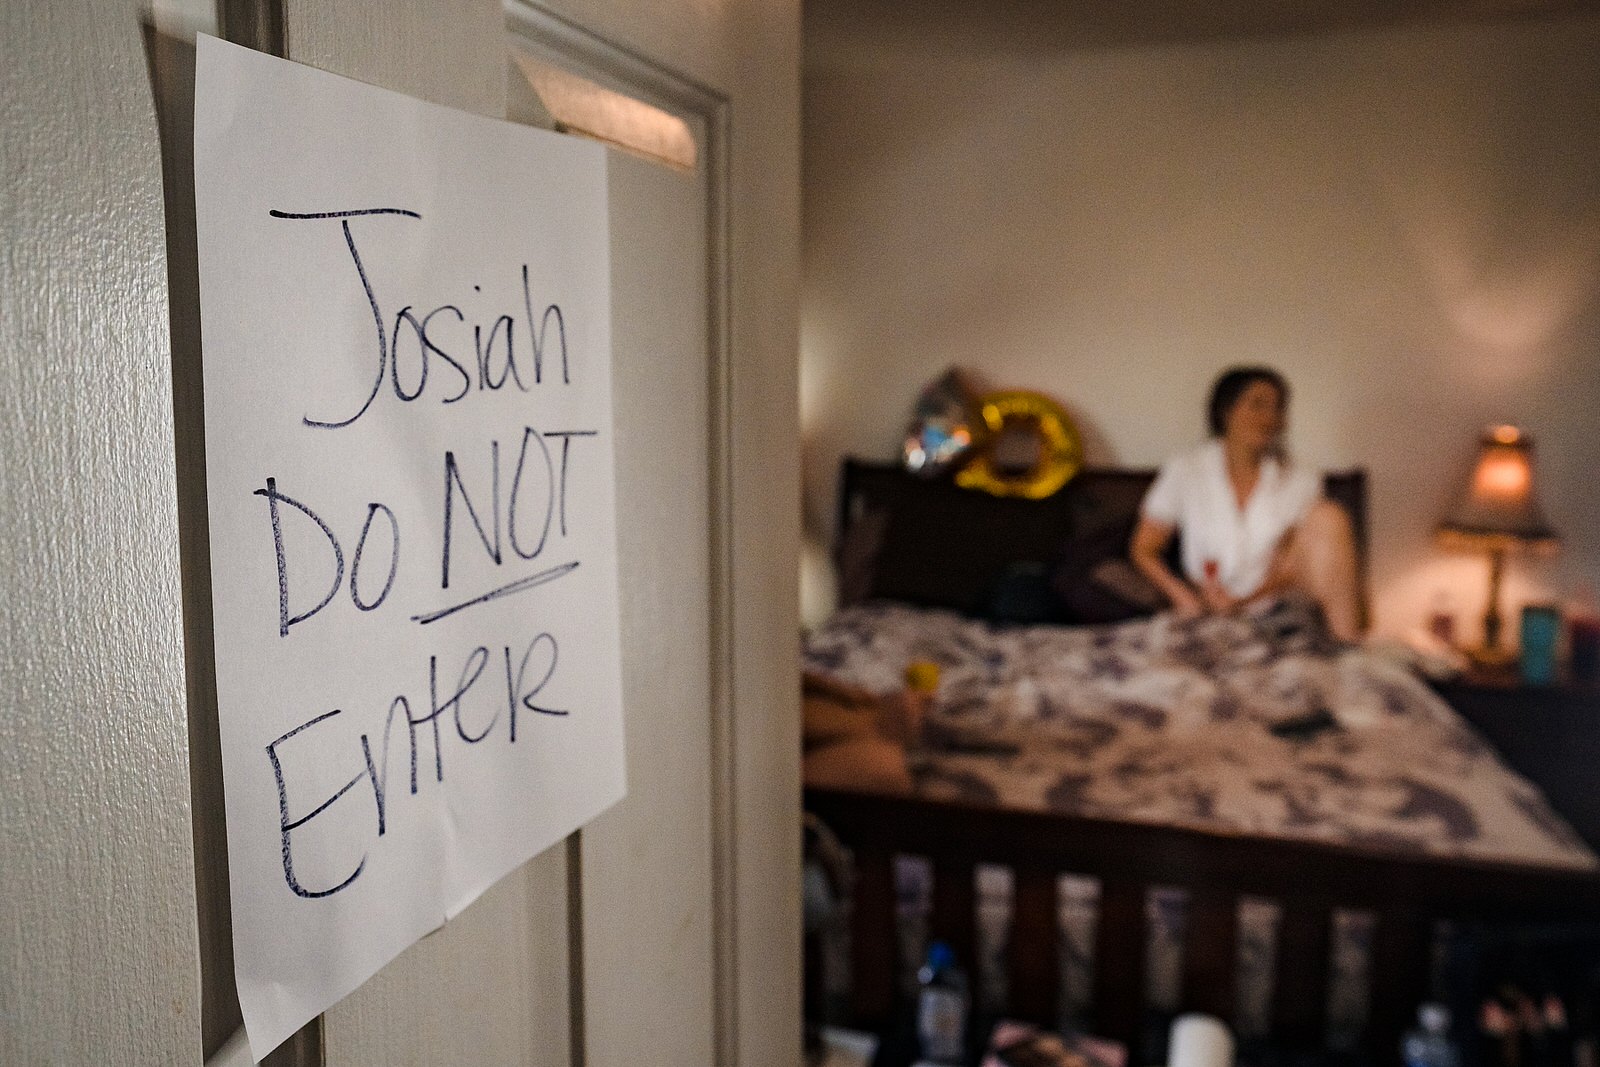 This bride put a sign on the door of the room that she was getting ready in that made it clear the groom could not come in